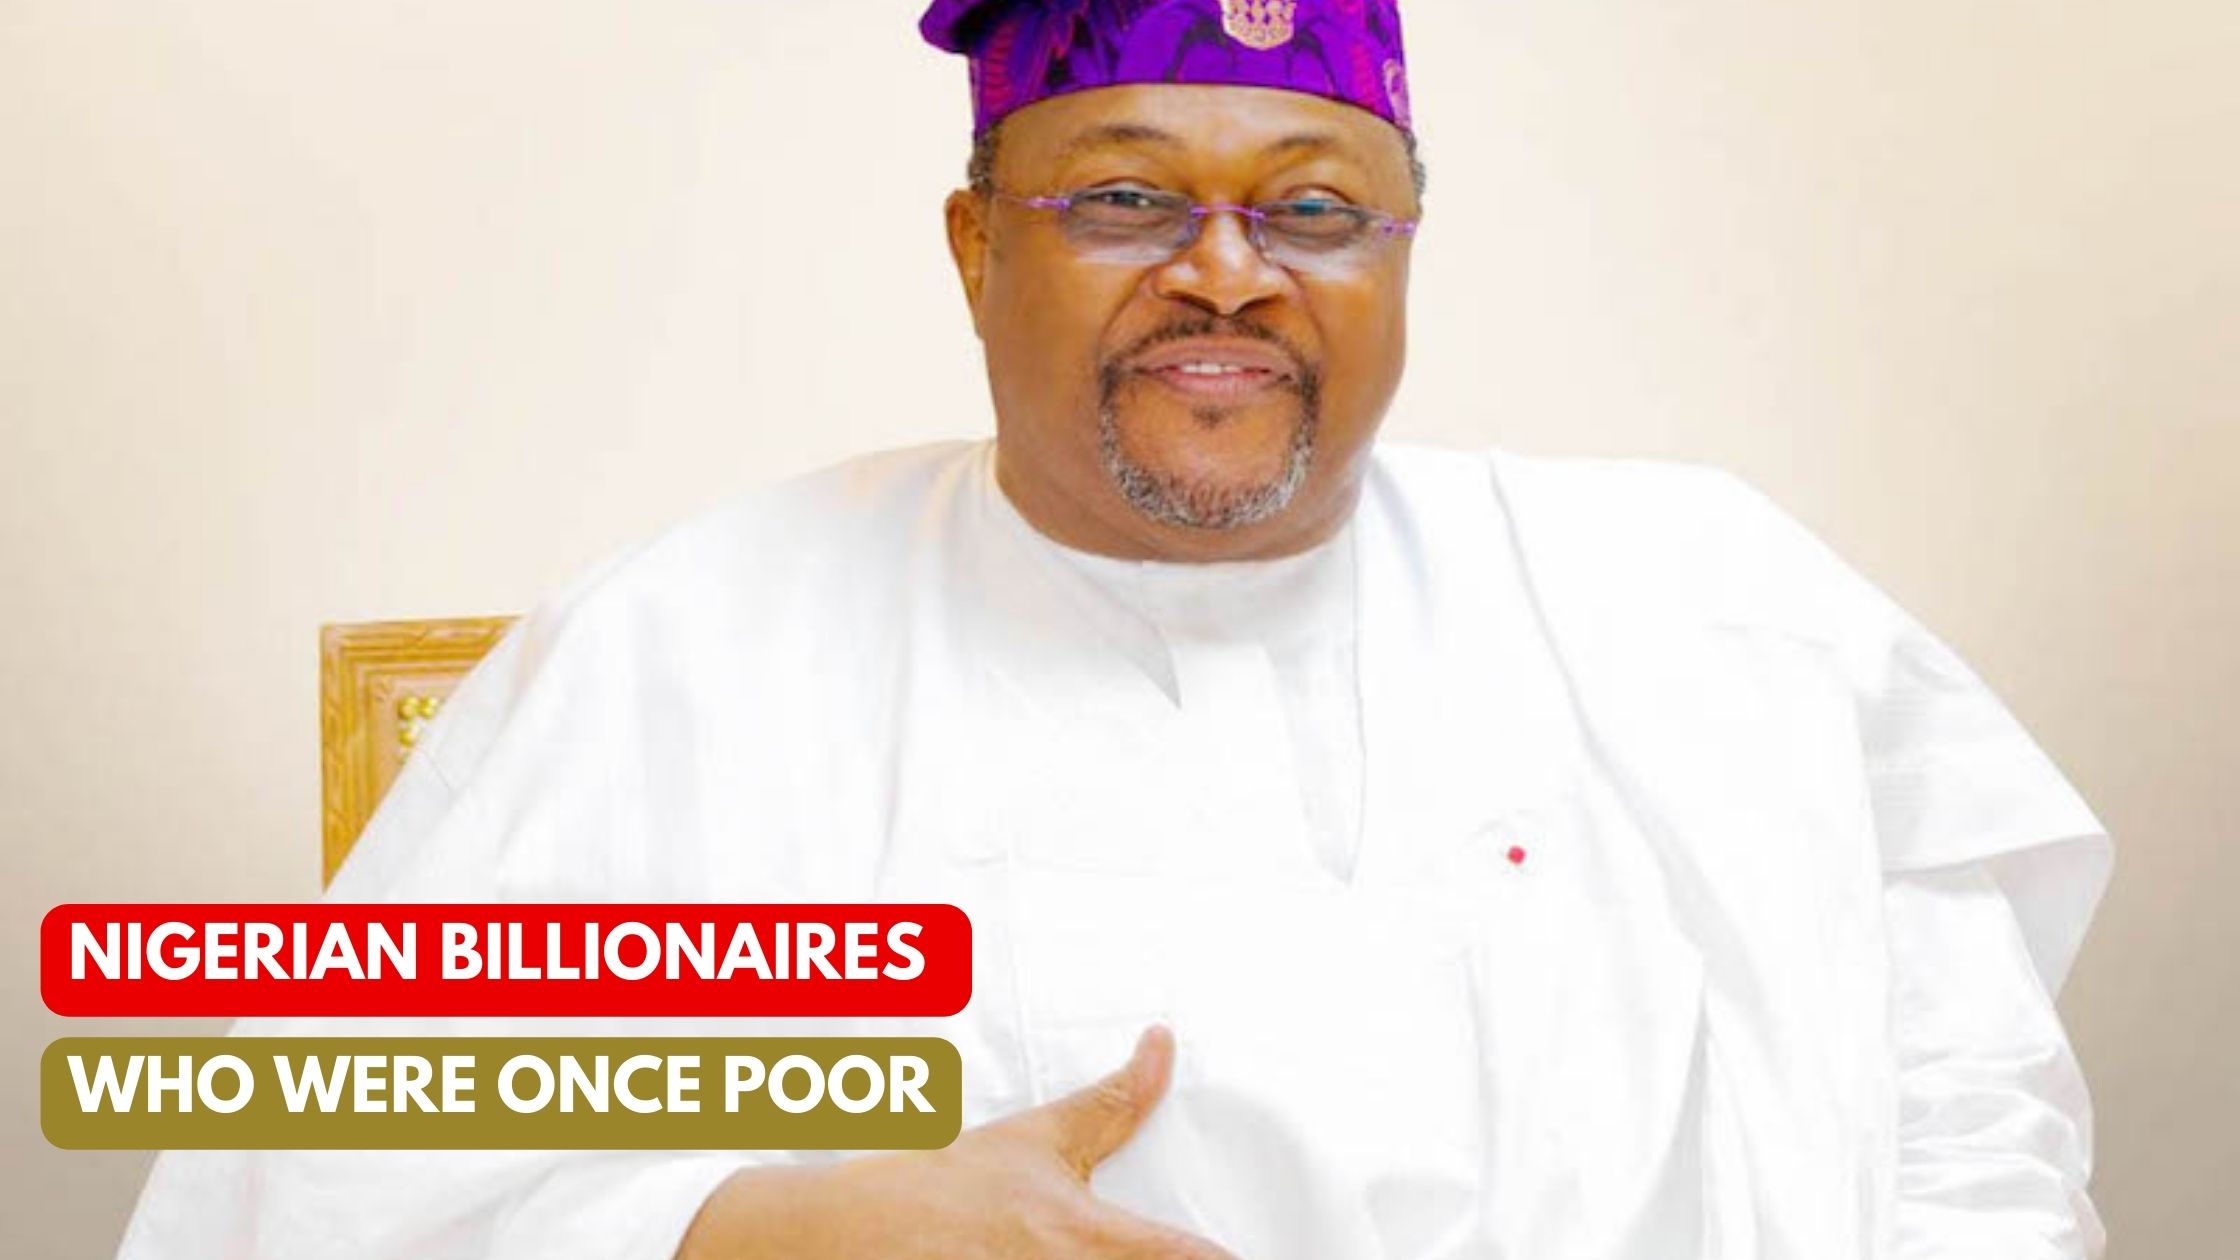 3 Nigerian Billionaires Who Were Once Poor